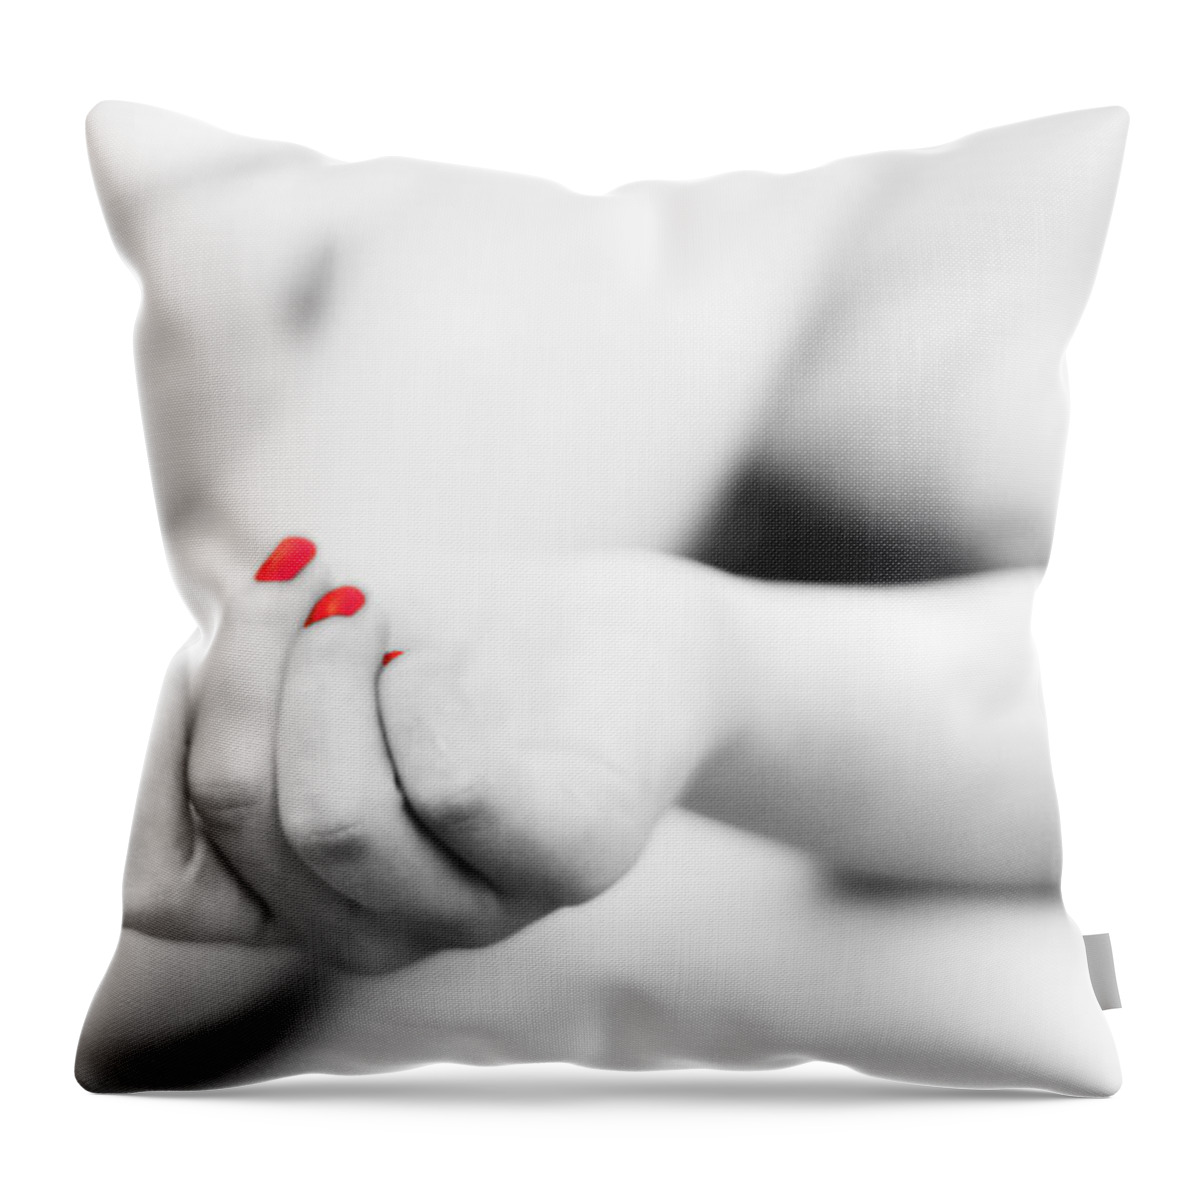 Adult Throw Pillow featuring the photograph Tania by Stelios Kleanthous